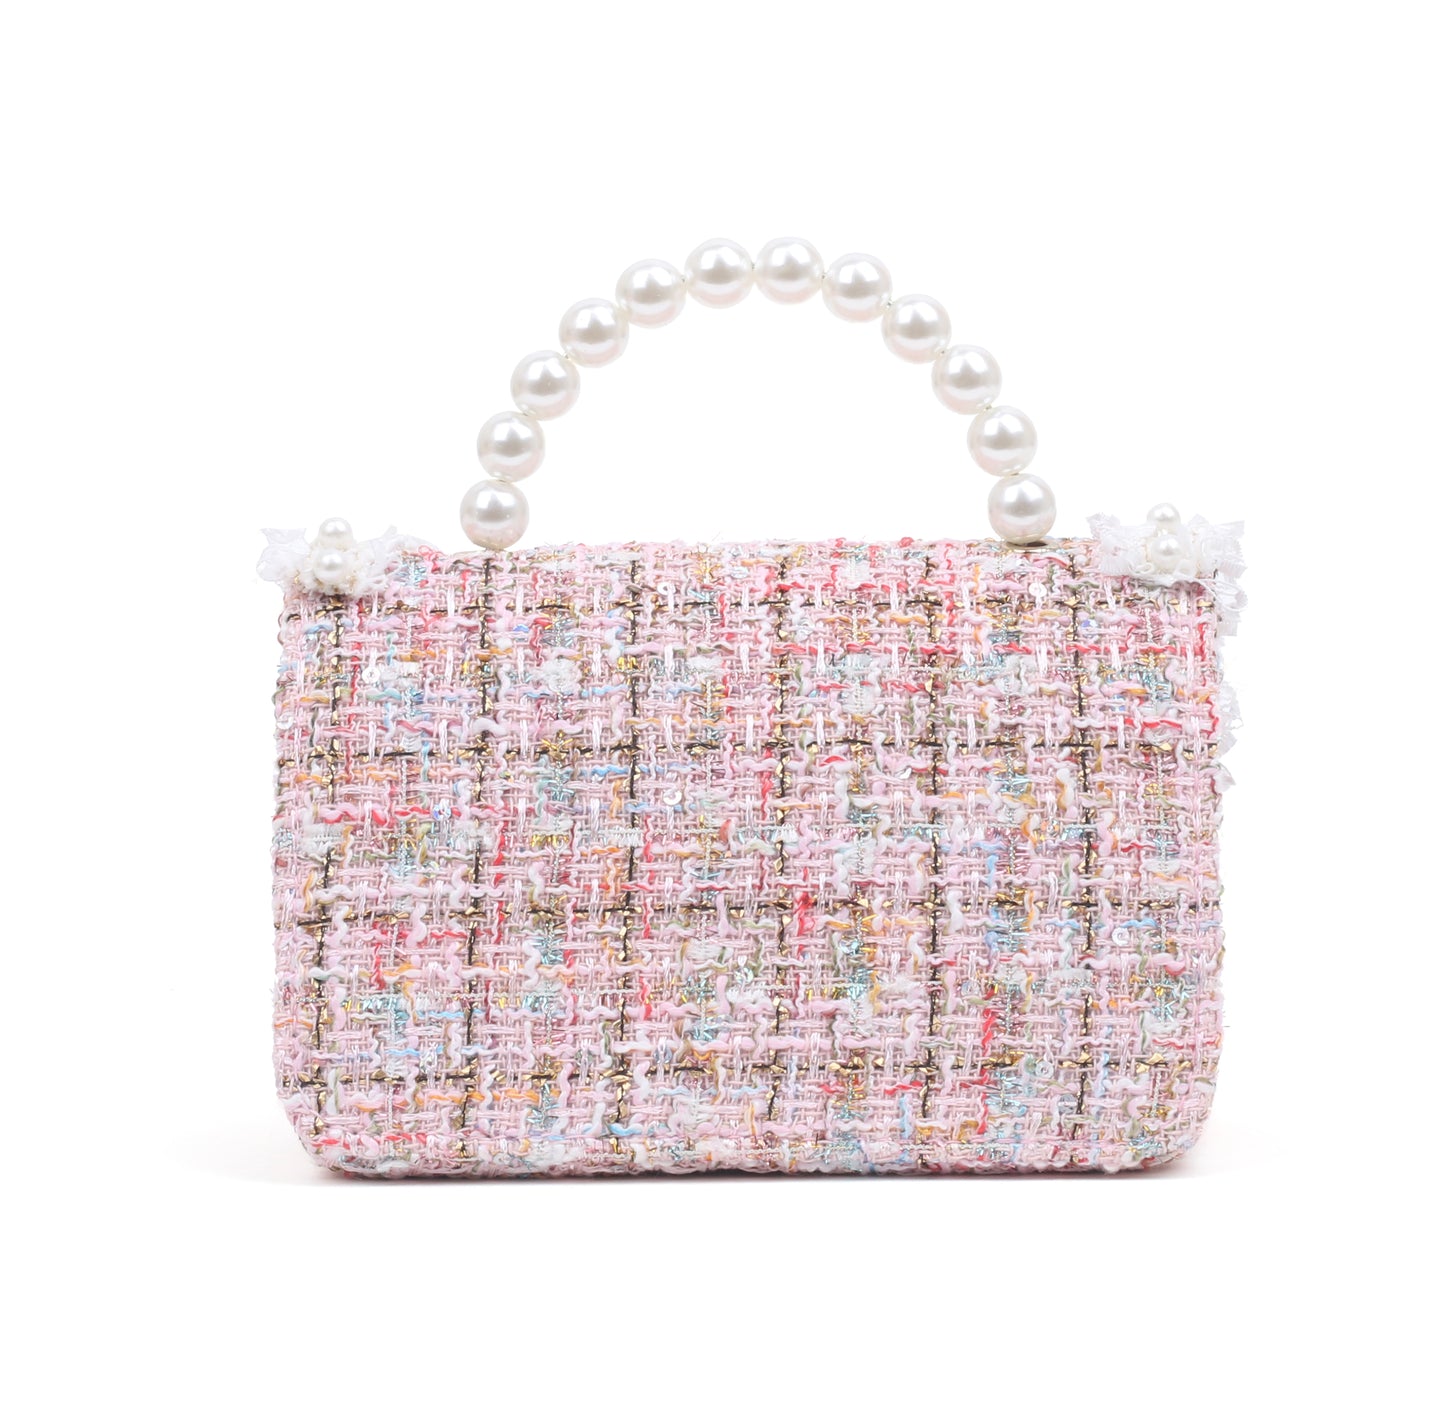 Baby's Breath Keith Bag (Pink)